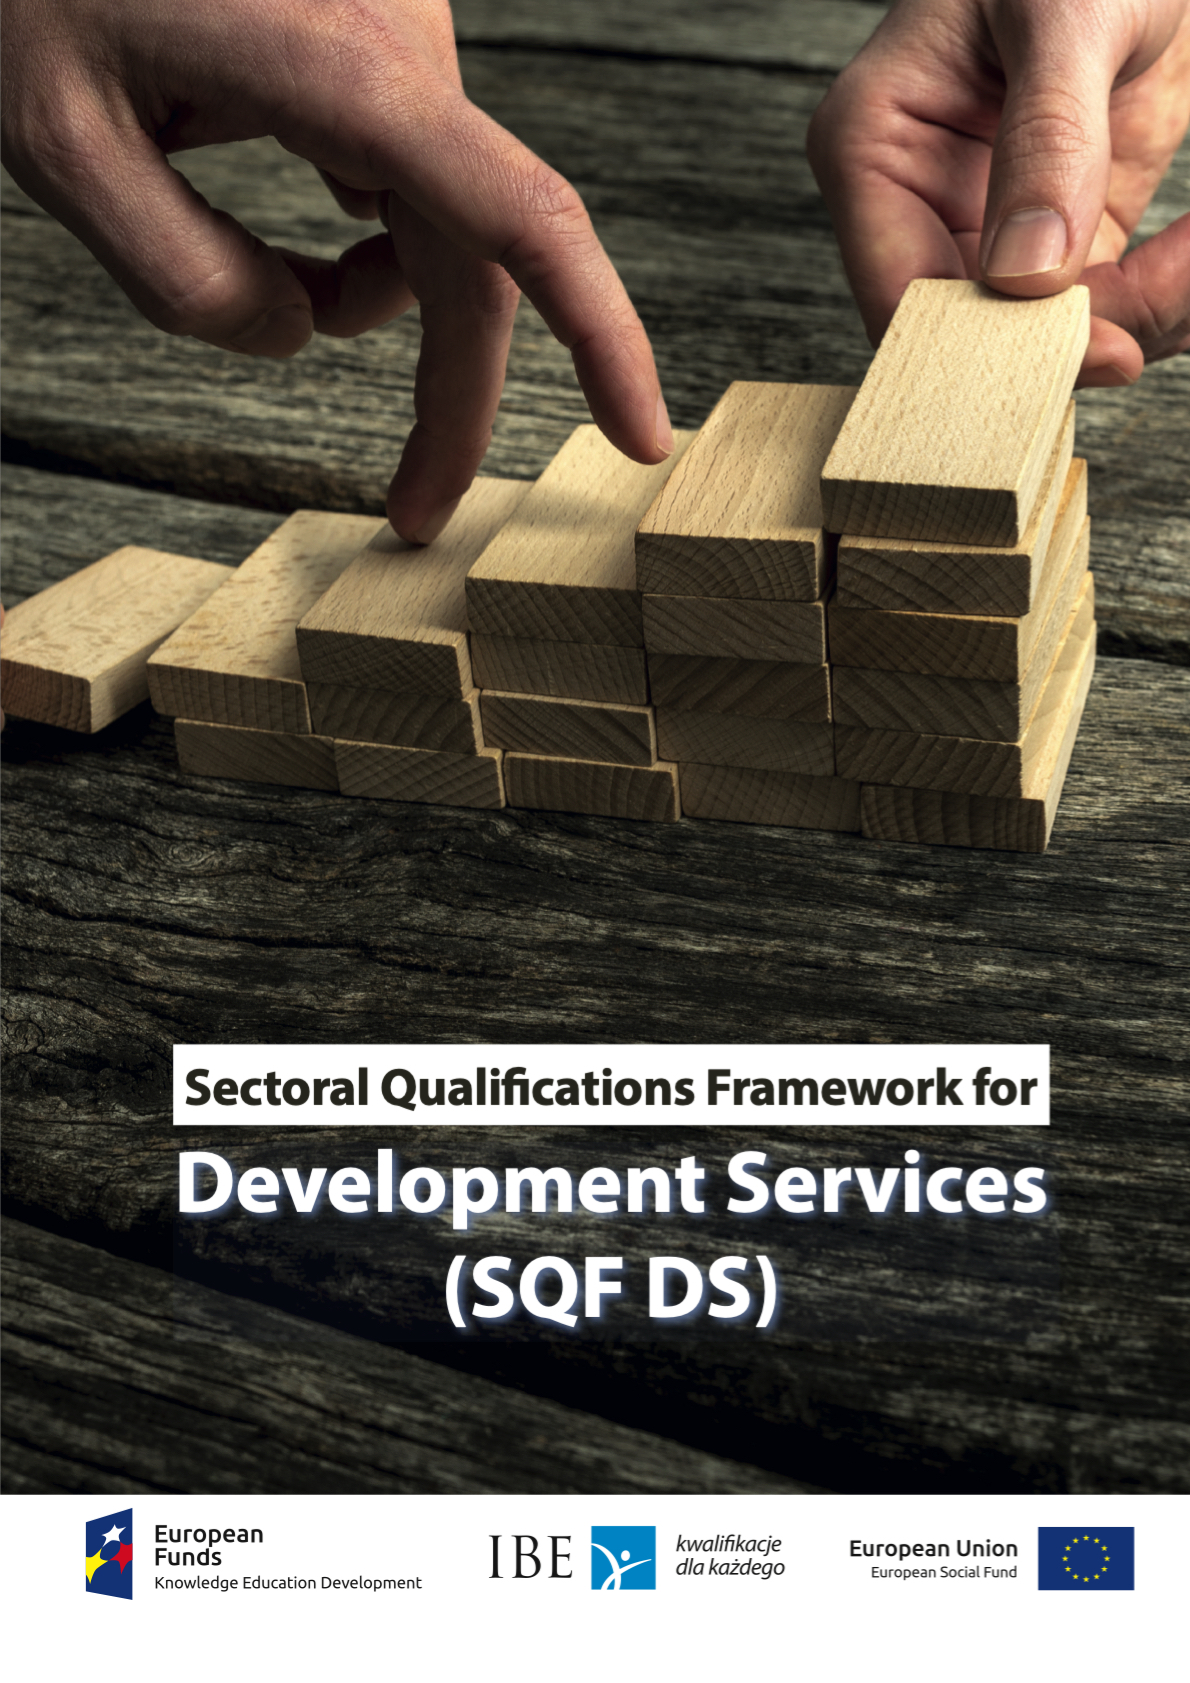 Sectoral Qualifications Framework for Development Services (SQF DS)